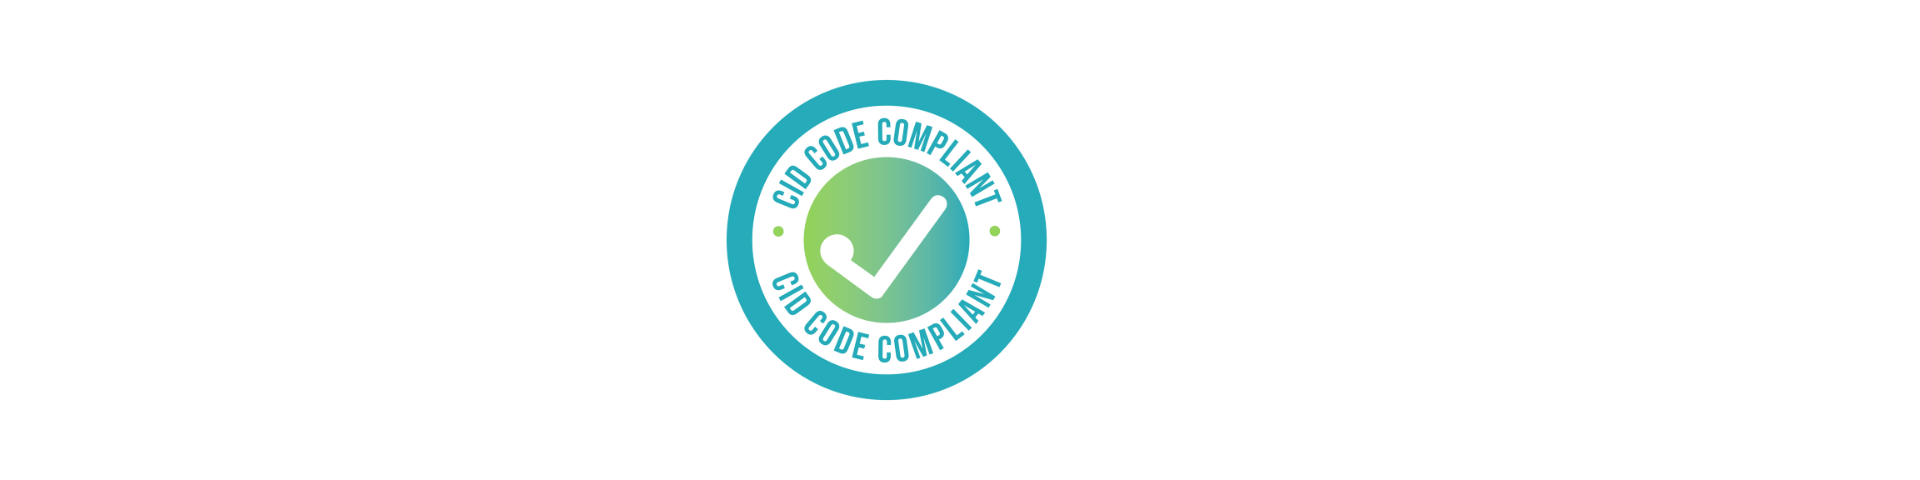 Contact Us- The CID Code Compliant tick 